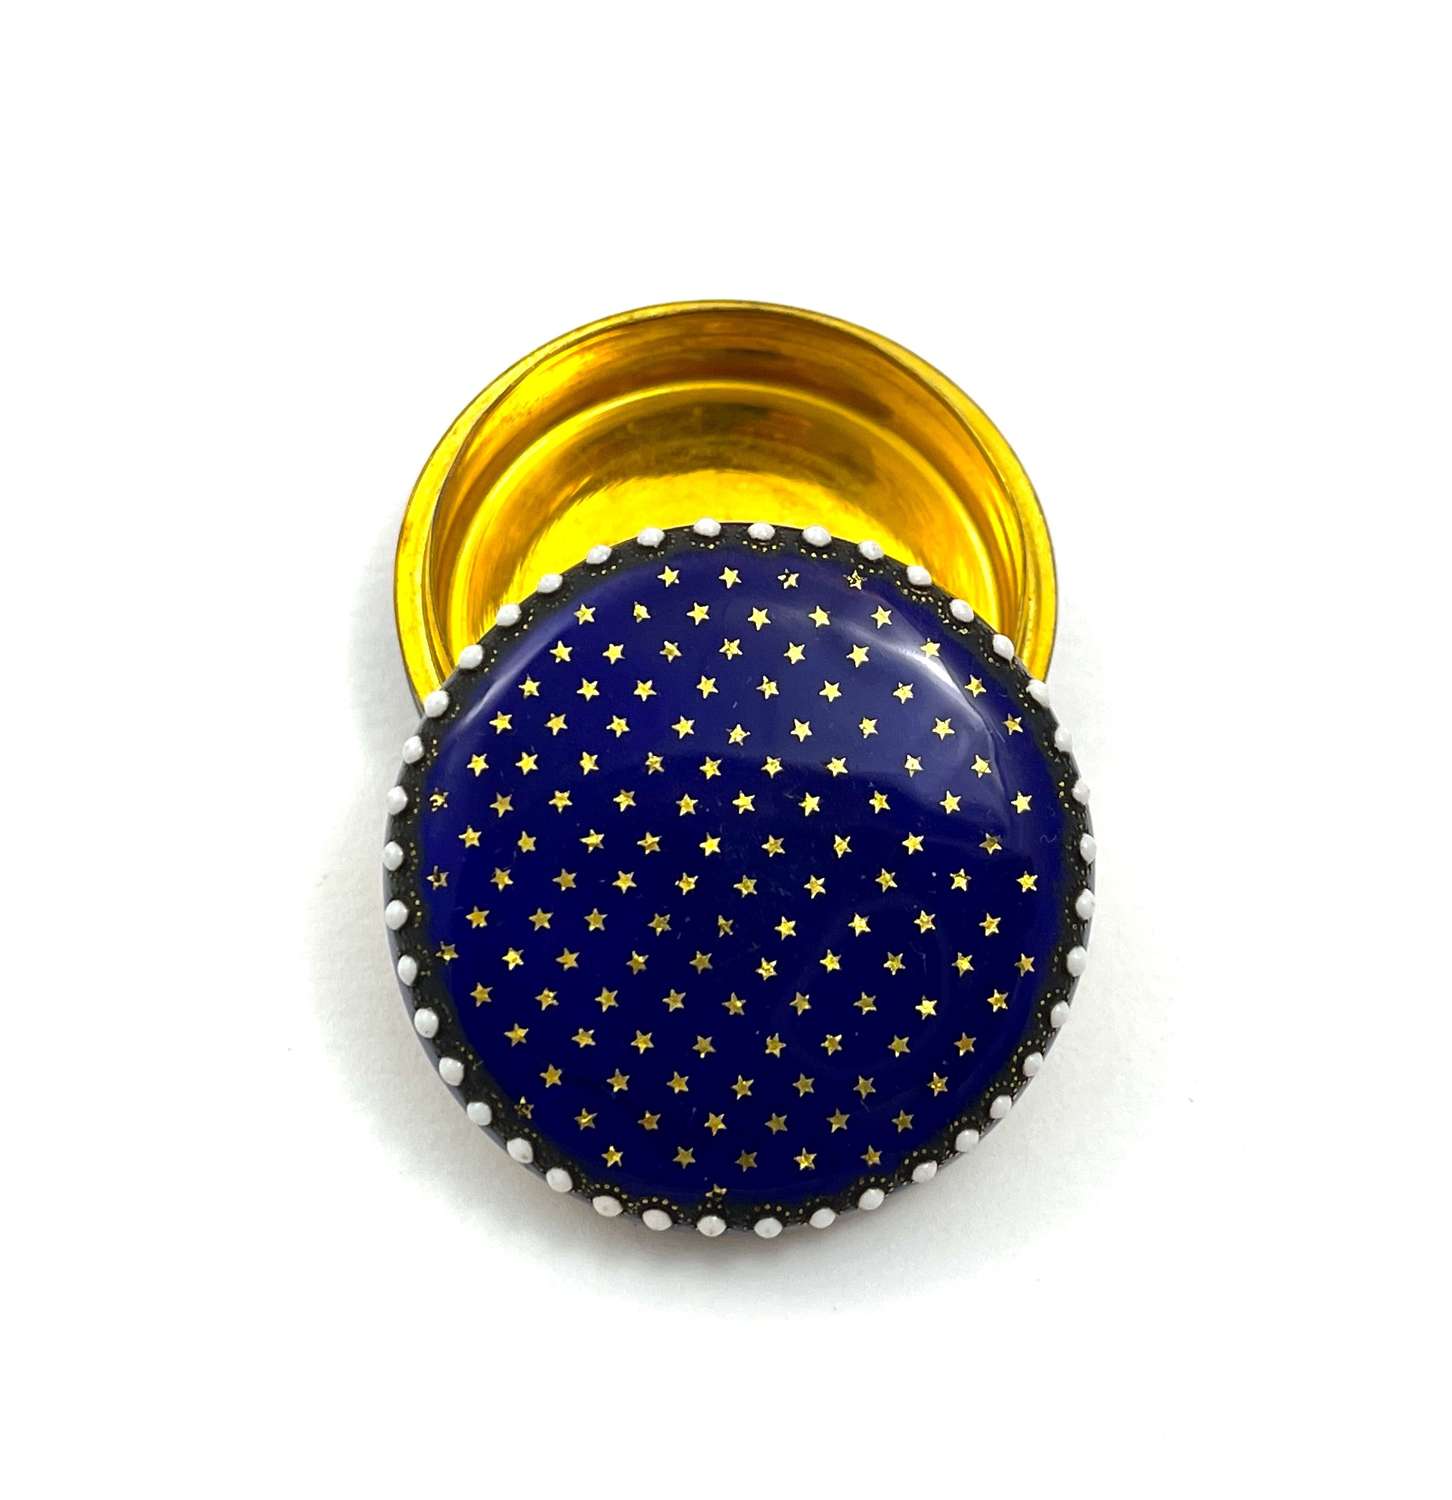 Small Antique French Blue Guilloche Enamel Box with Gold Stars